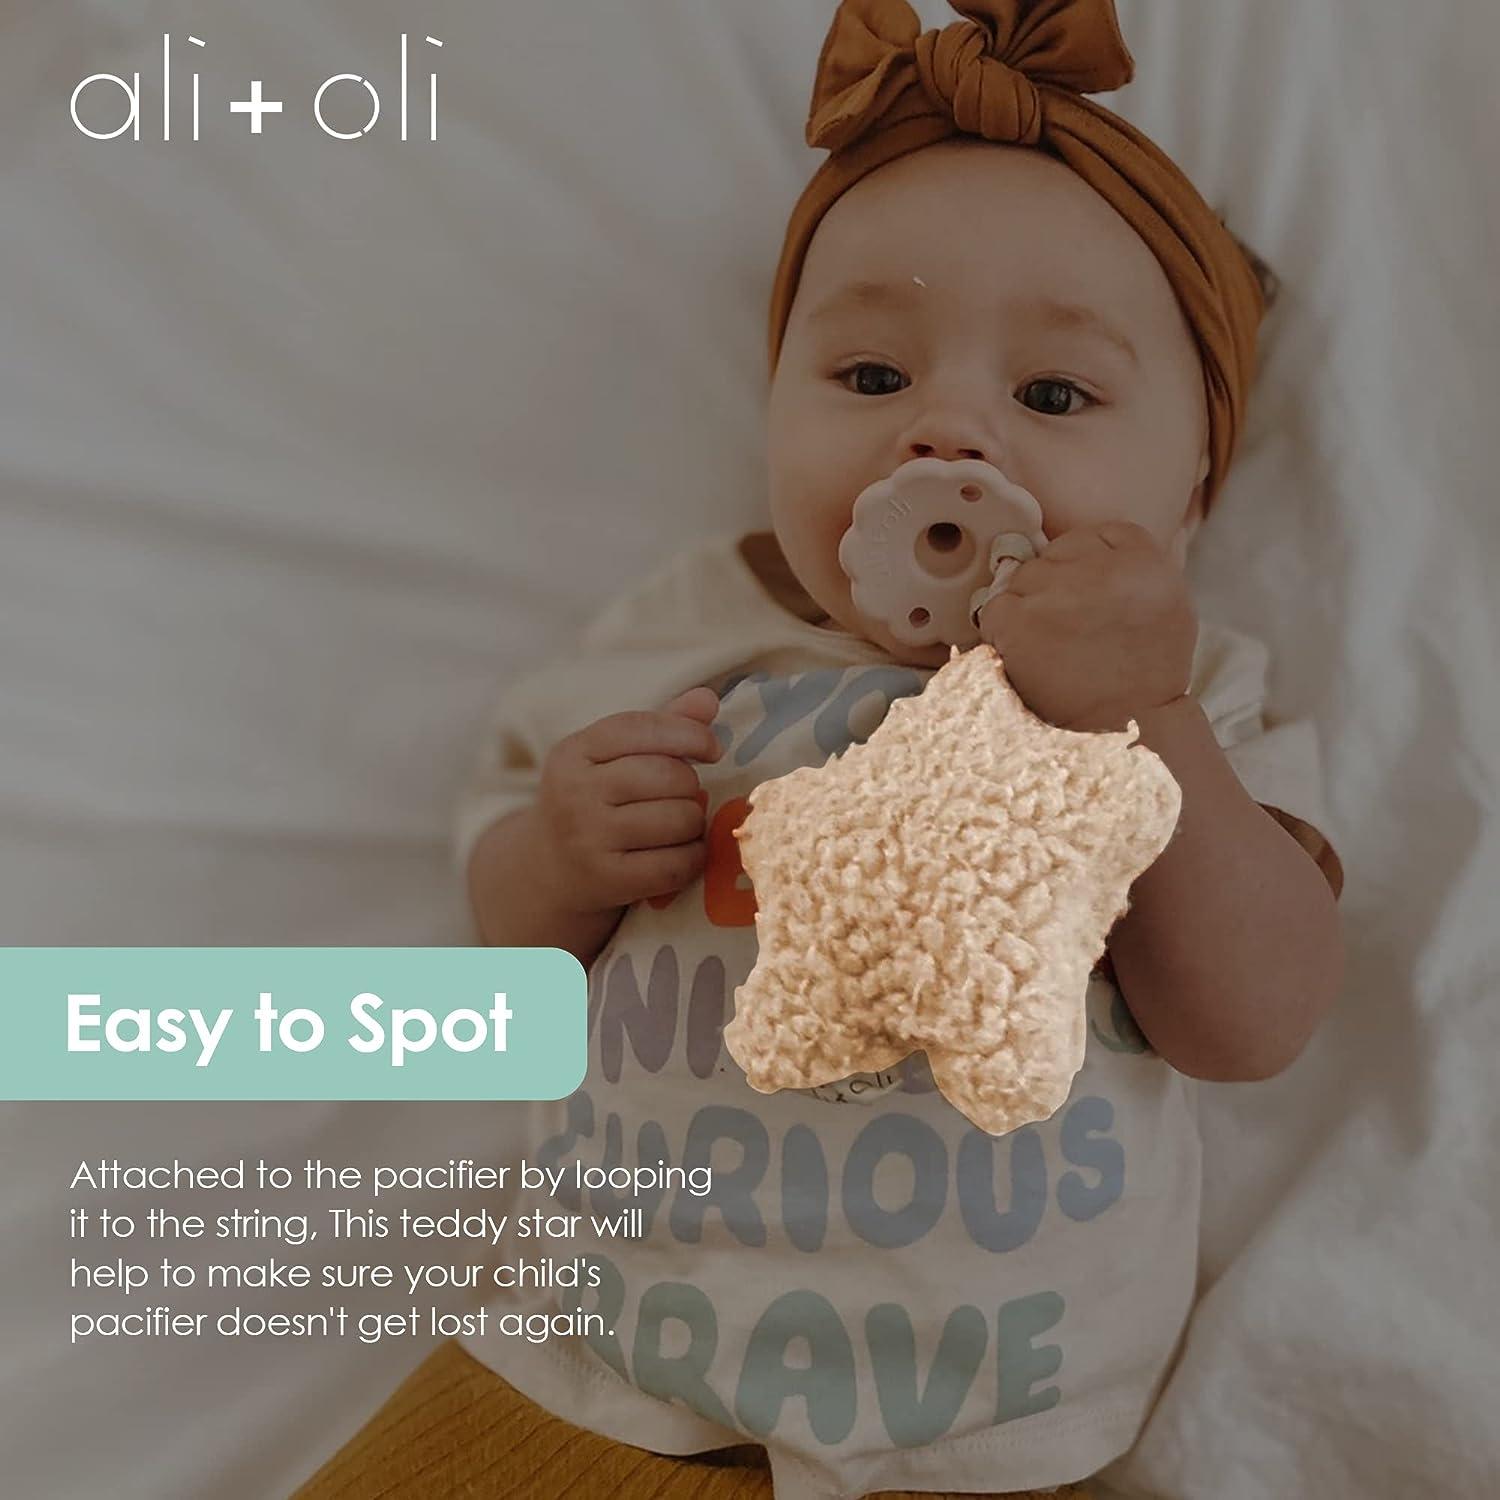 Ali + Oli Baby Soft Silicone Mini-Animal Puzzle 4-pc. Toys for Toddlers